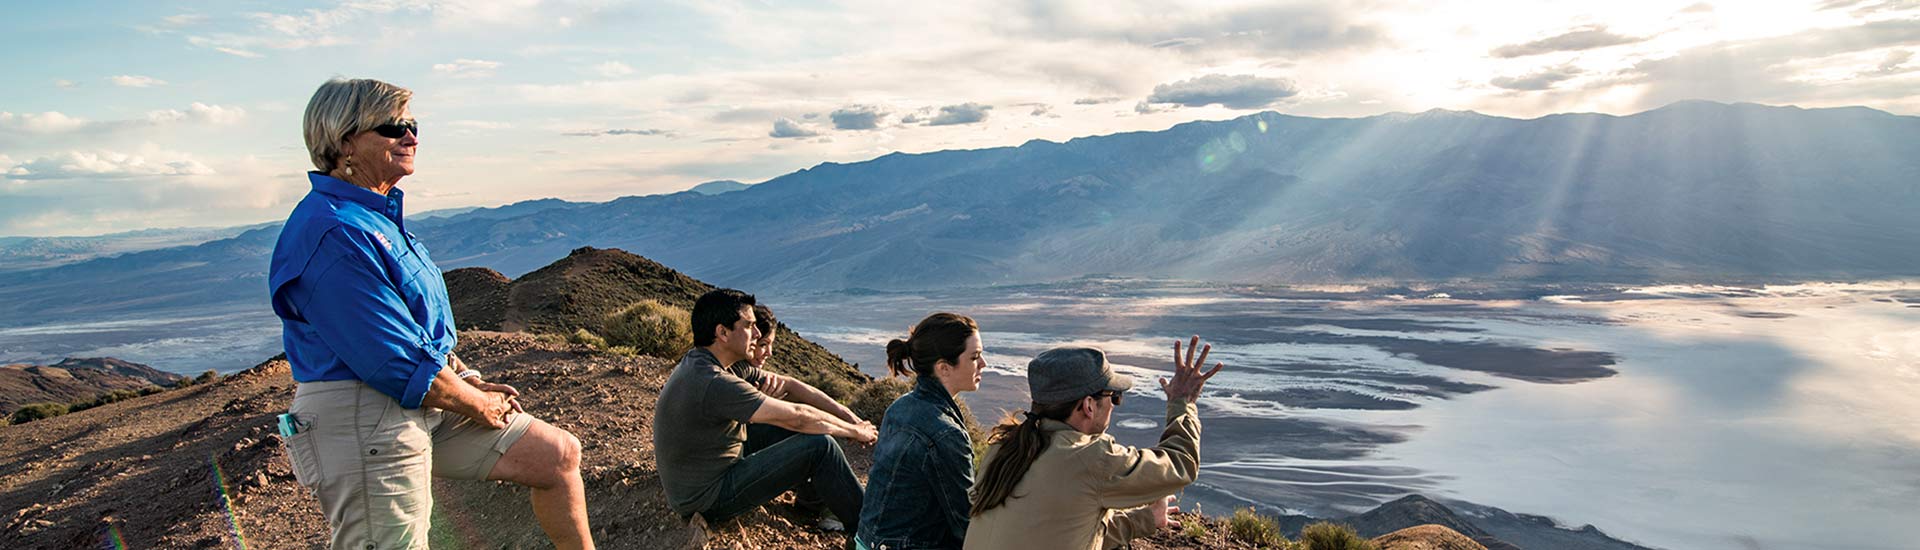 Pink Adventure guide and guests sitting atop Dante's View watching sunrise at Death Valley National Park.